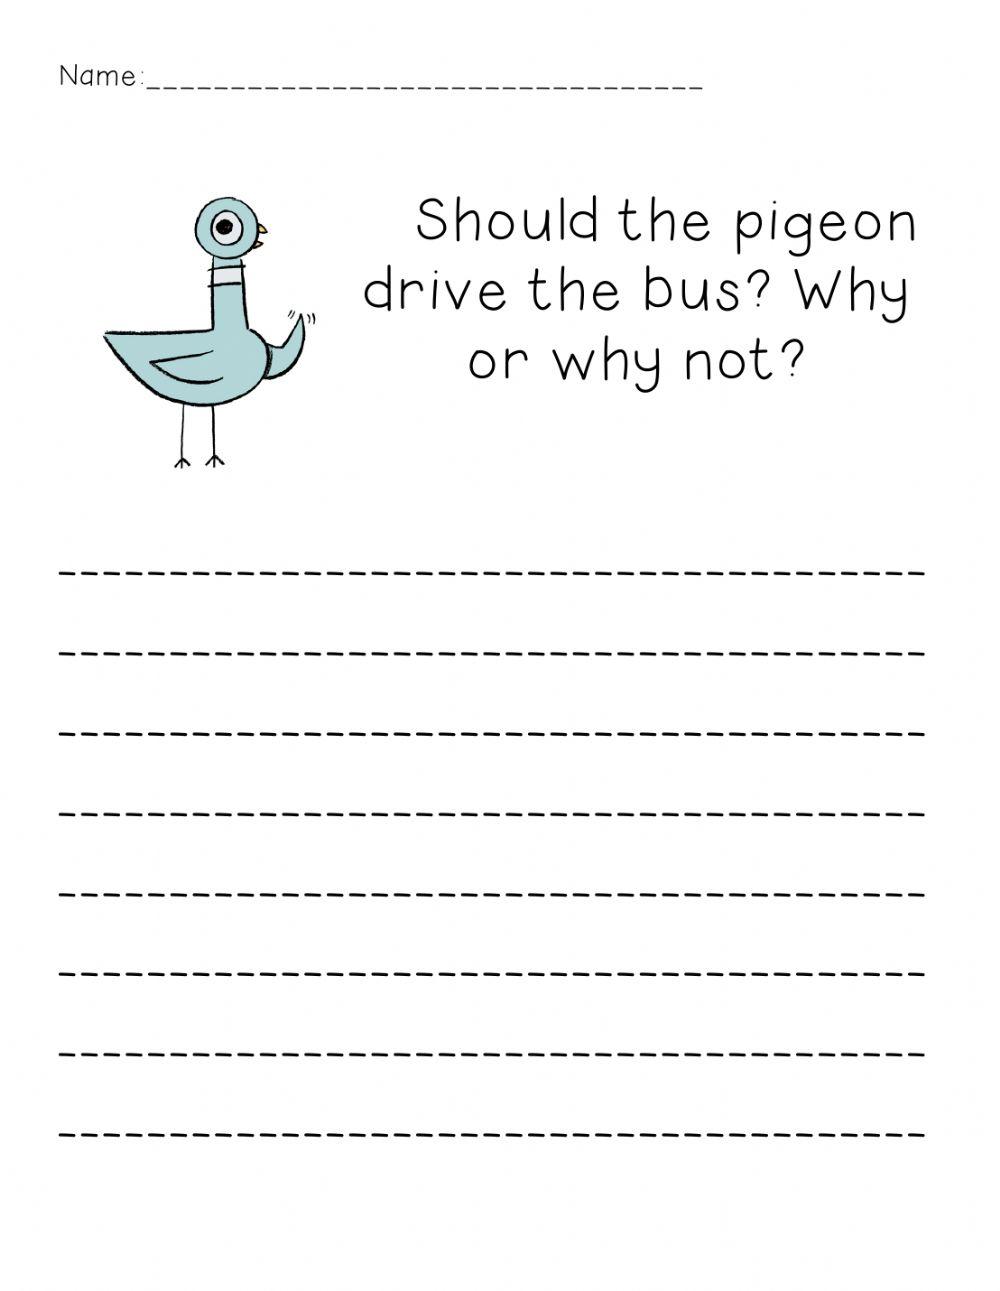 Opinion Writing Should the Pigeon Drive the Bus